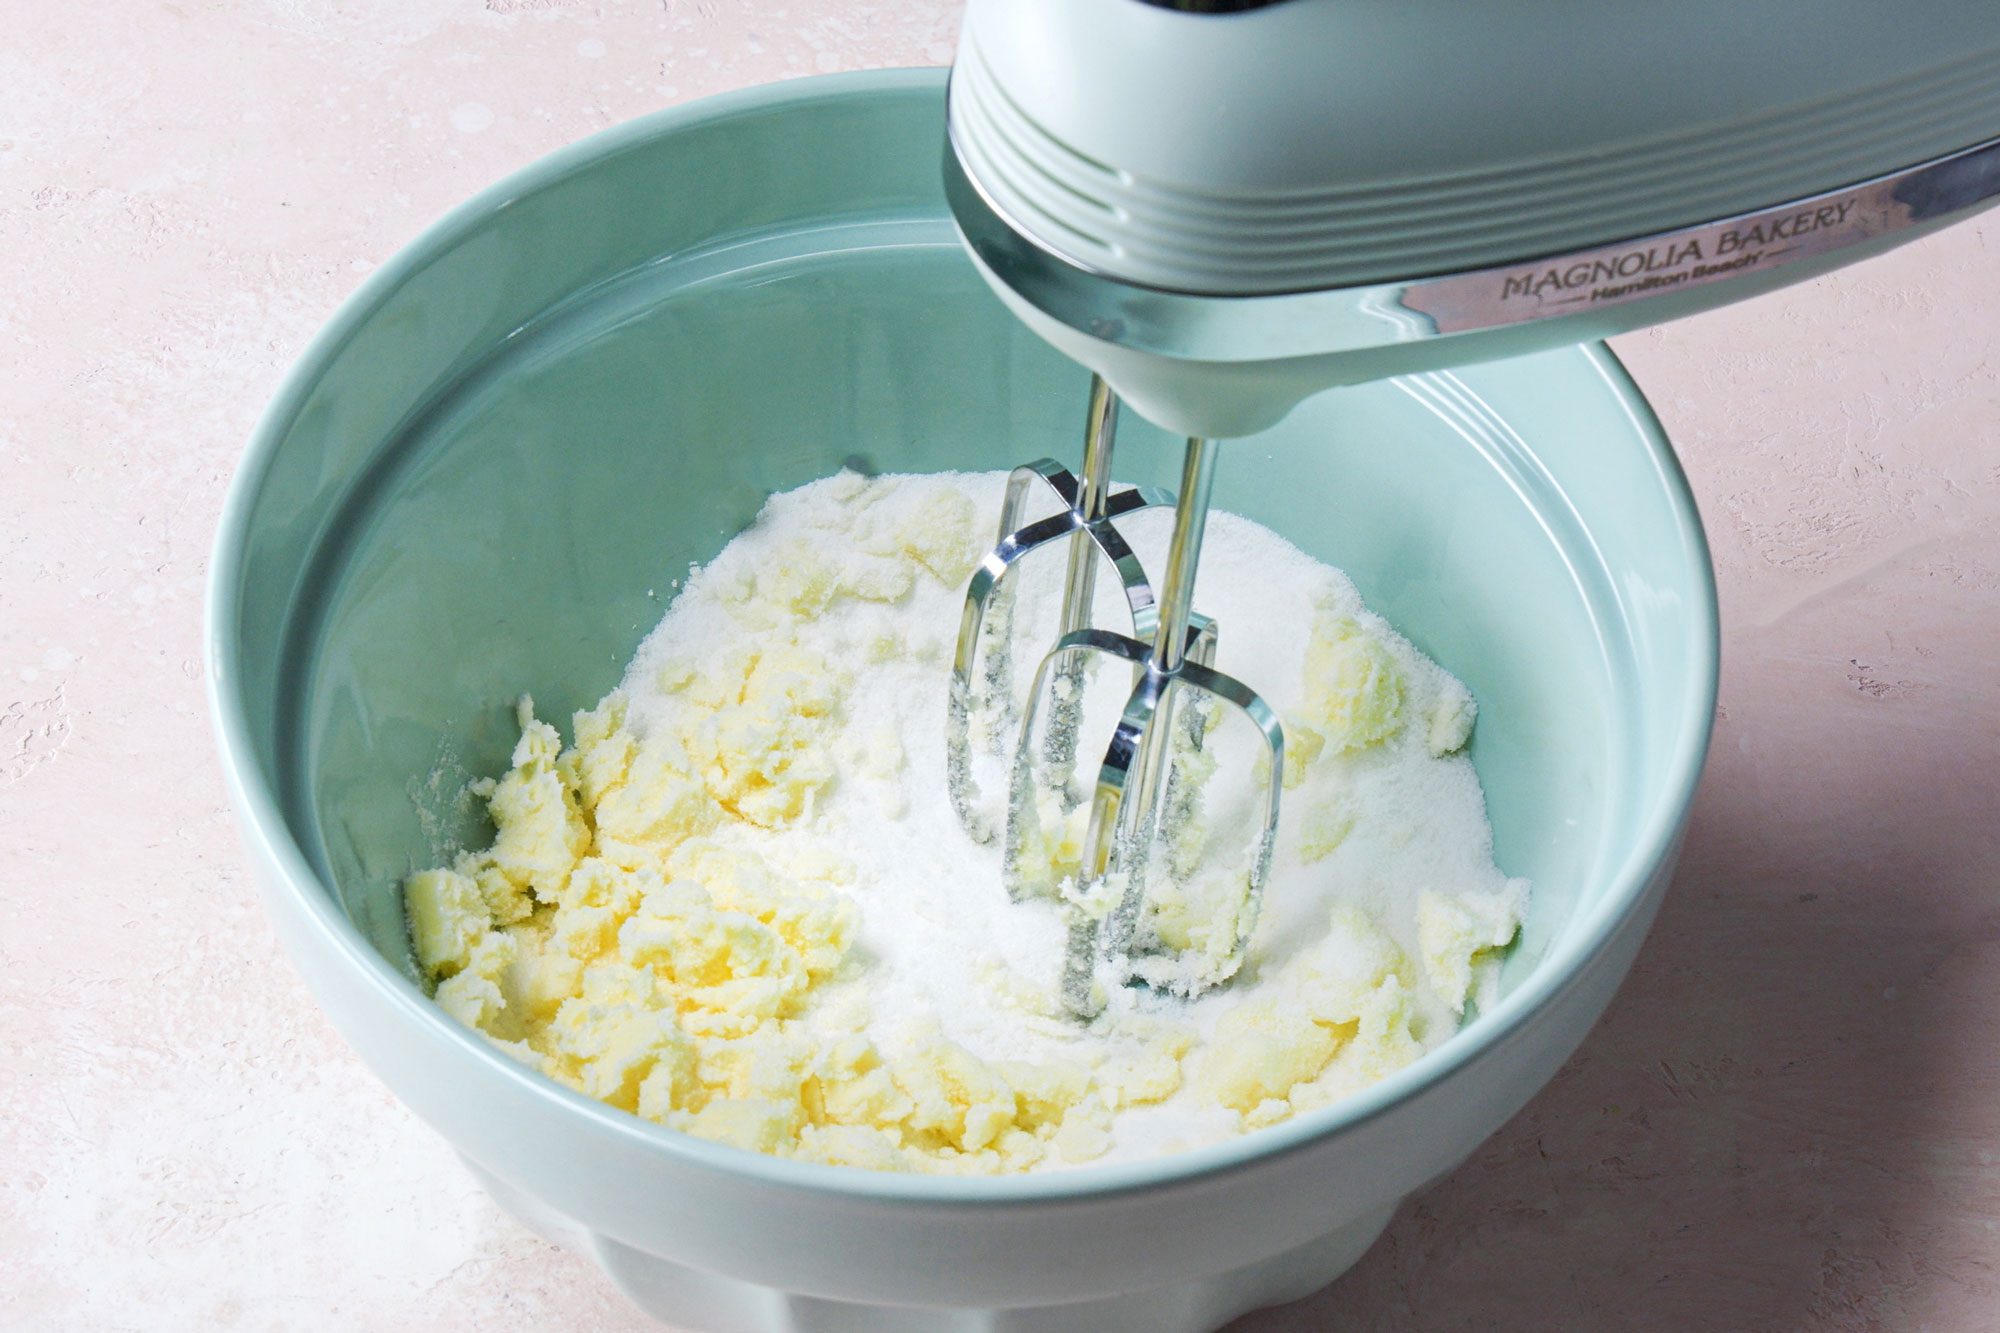 Whisk together the flour, baking powder and salt with the help of Stand Mixer